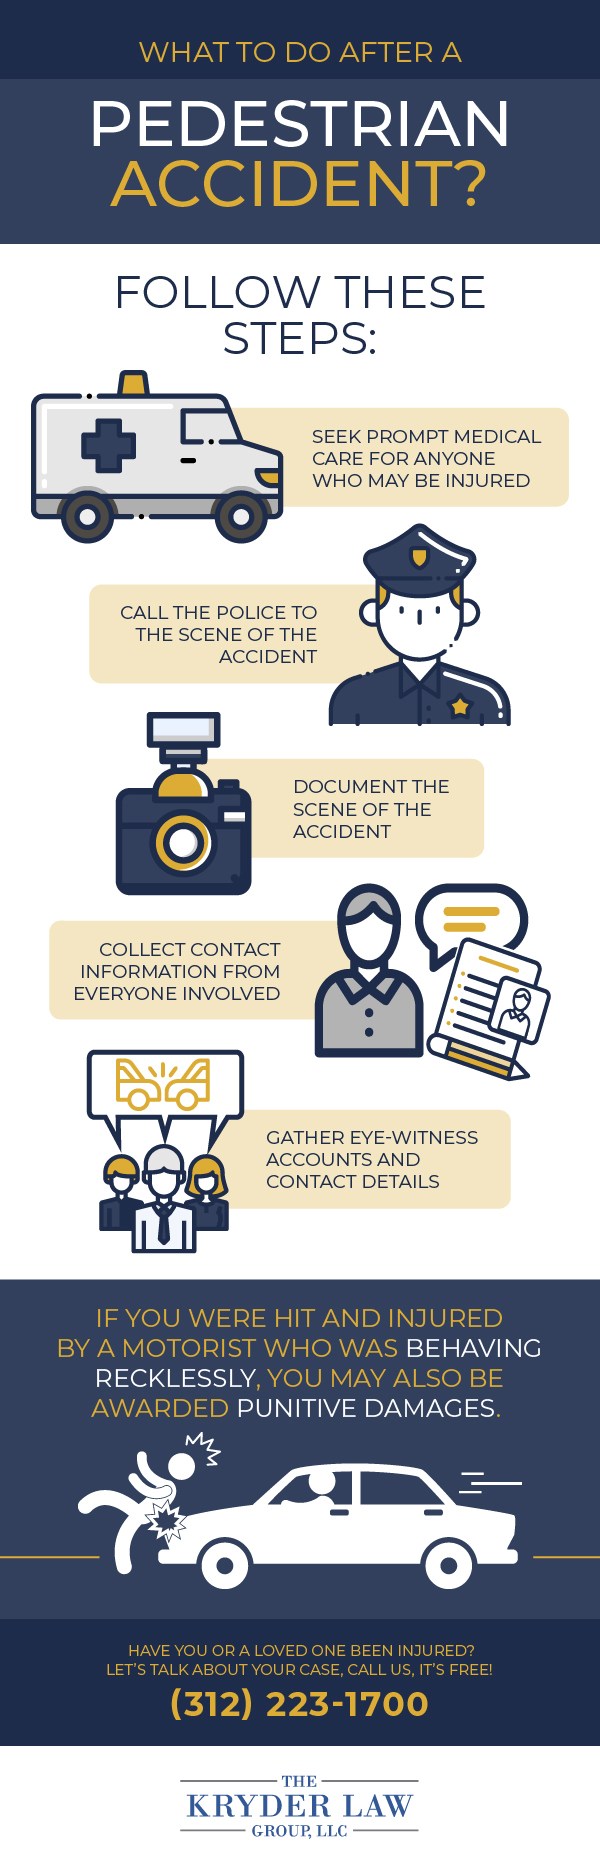 What to Do After a Pedestrian Accident Infographic